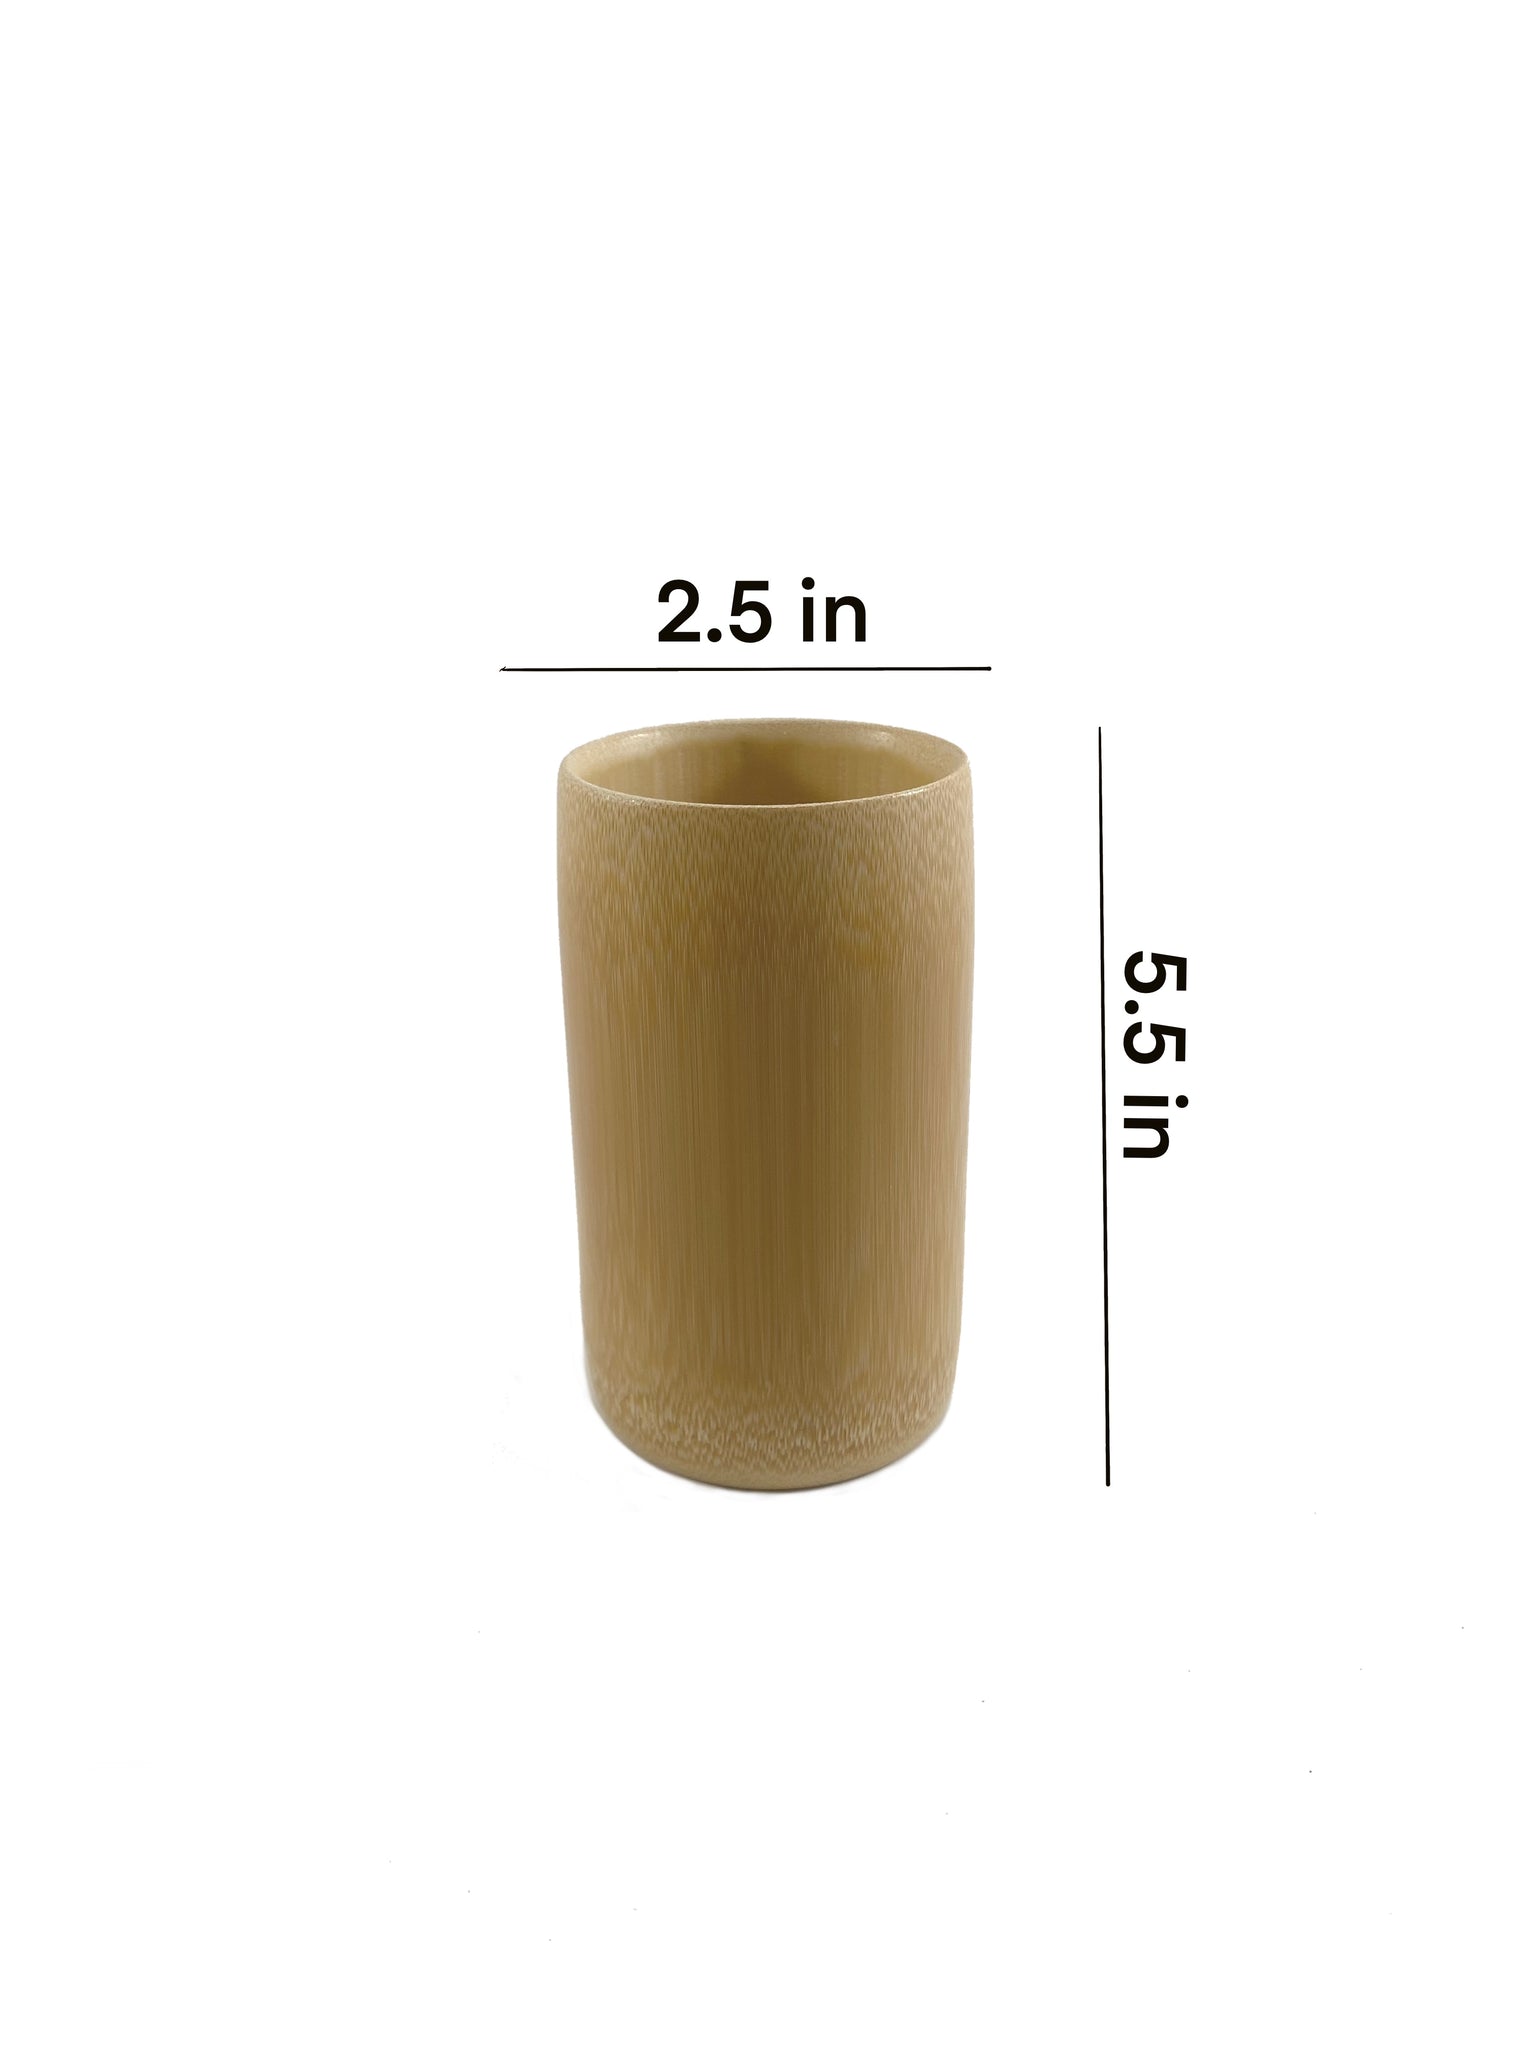 1pc 100% Pure Natural Bamboo Cups, Bamboo Cup Coffee, Bamboo Wine Cup  Bamboo Tea Cup